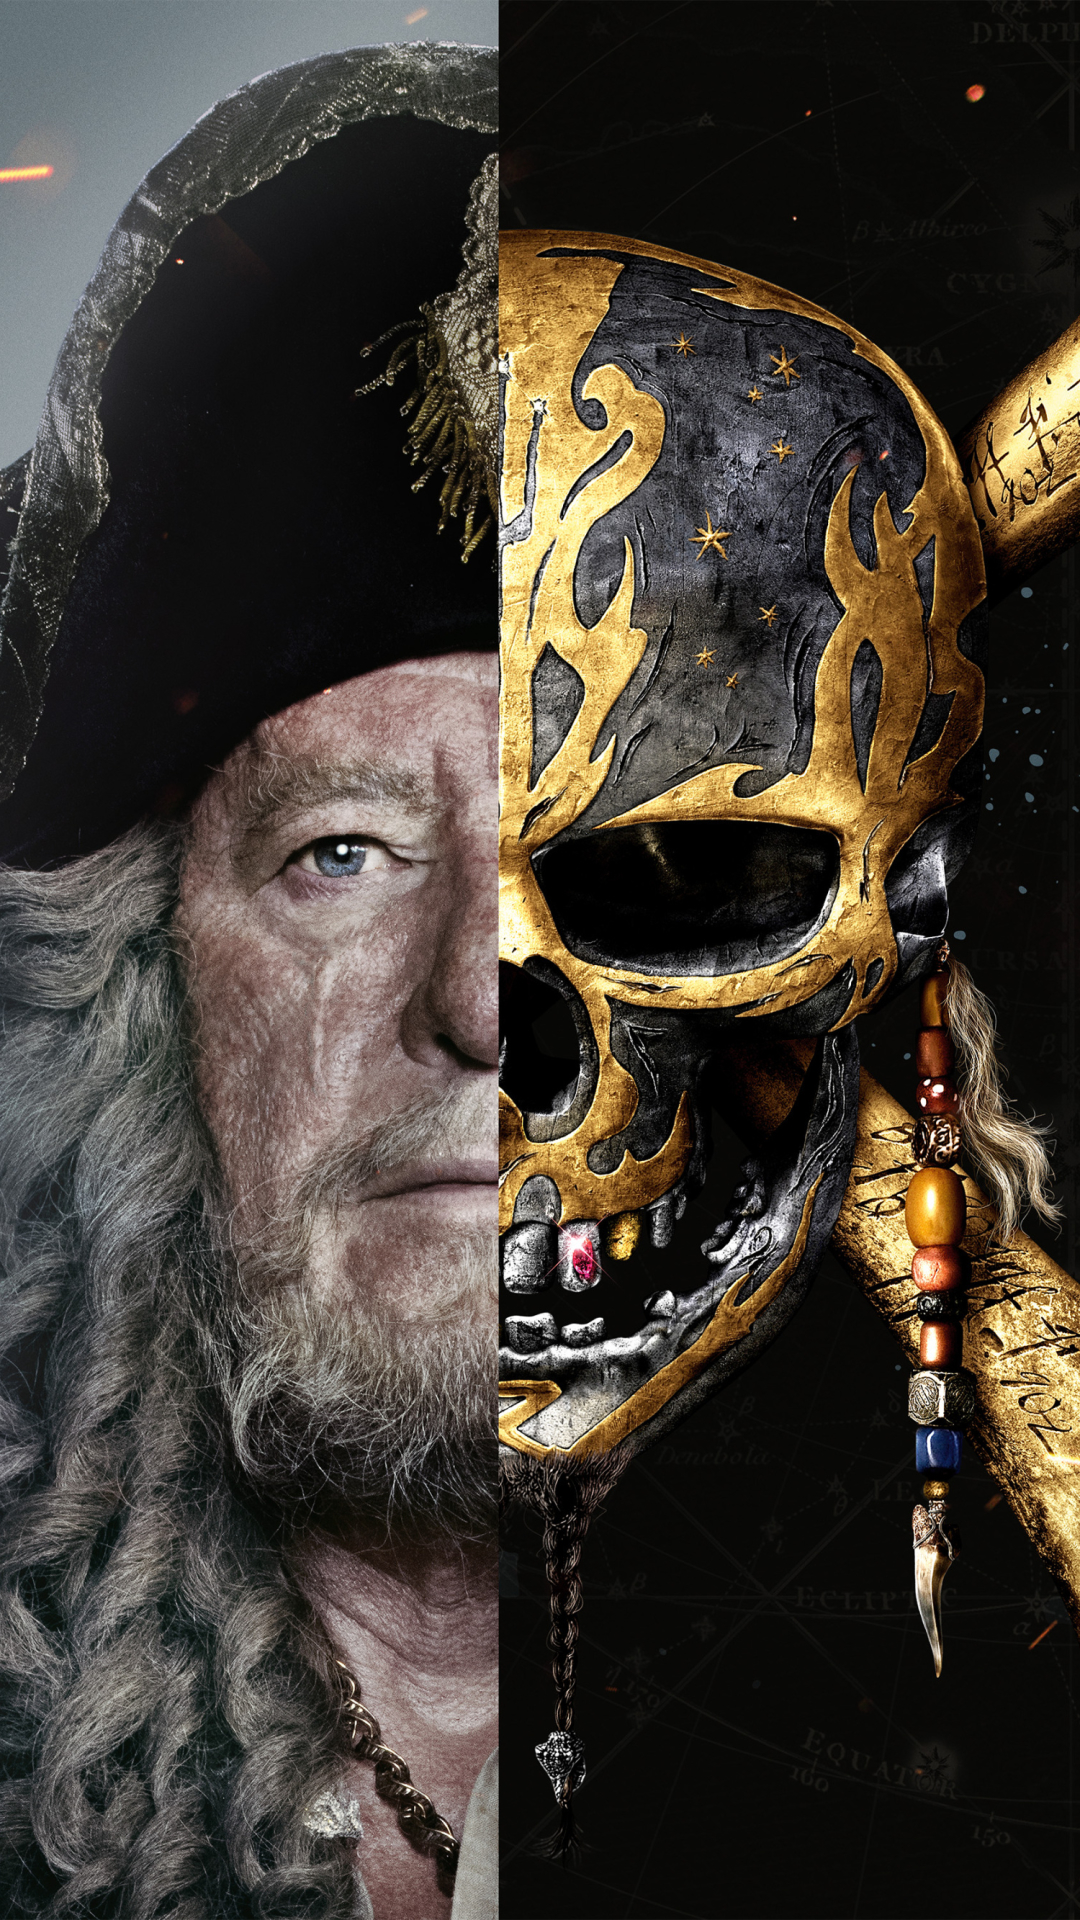 Pirates Of The Caribbean: Dead Men Tell No Tales Wallpapers